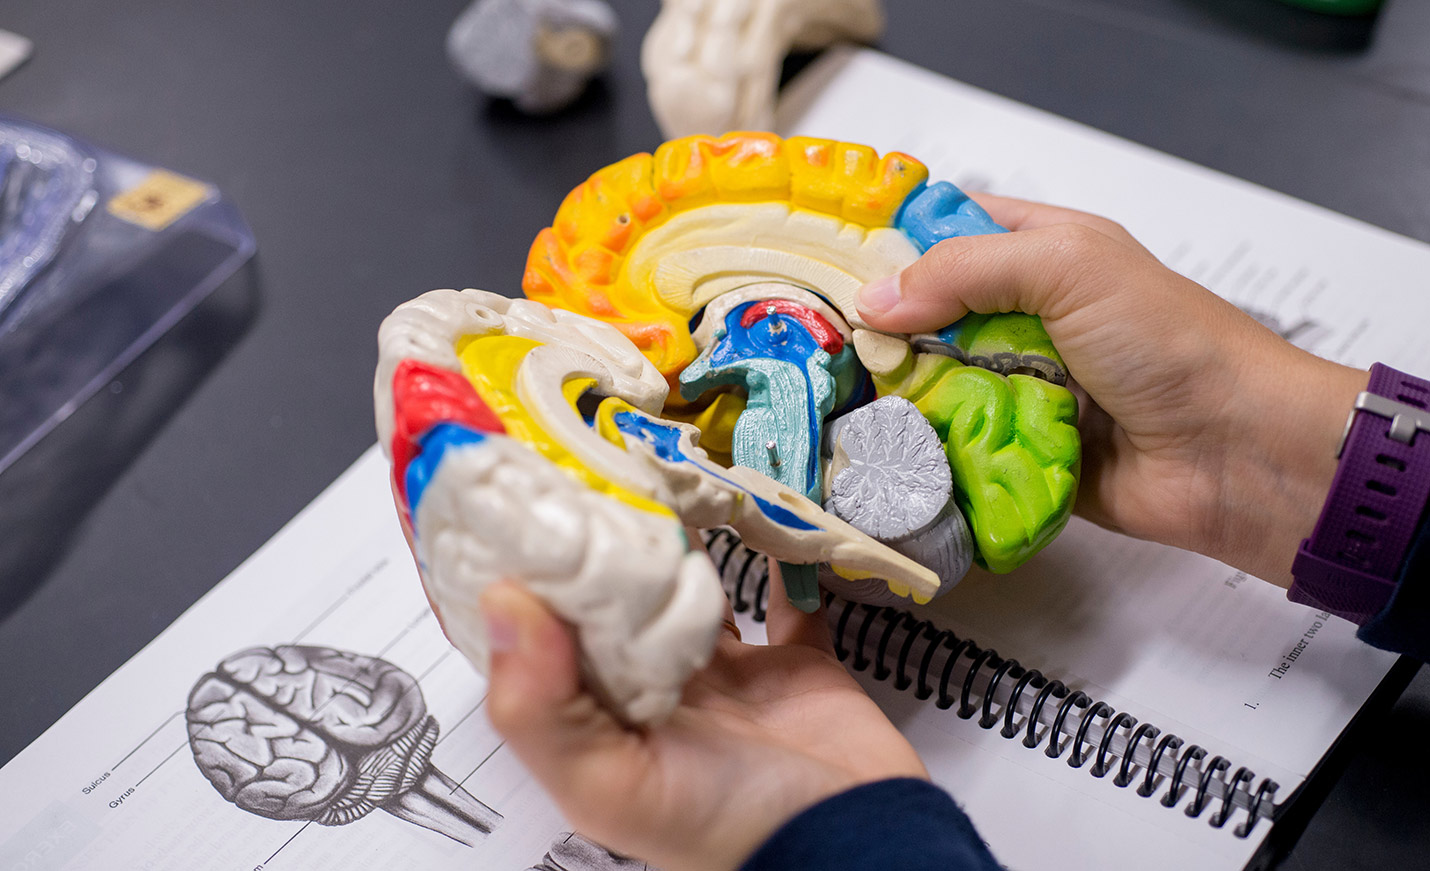 A pair of hands holds a model of the human brain, opened to show a cross section